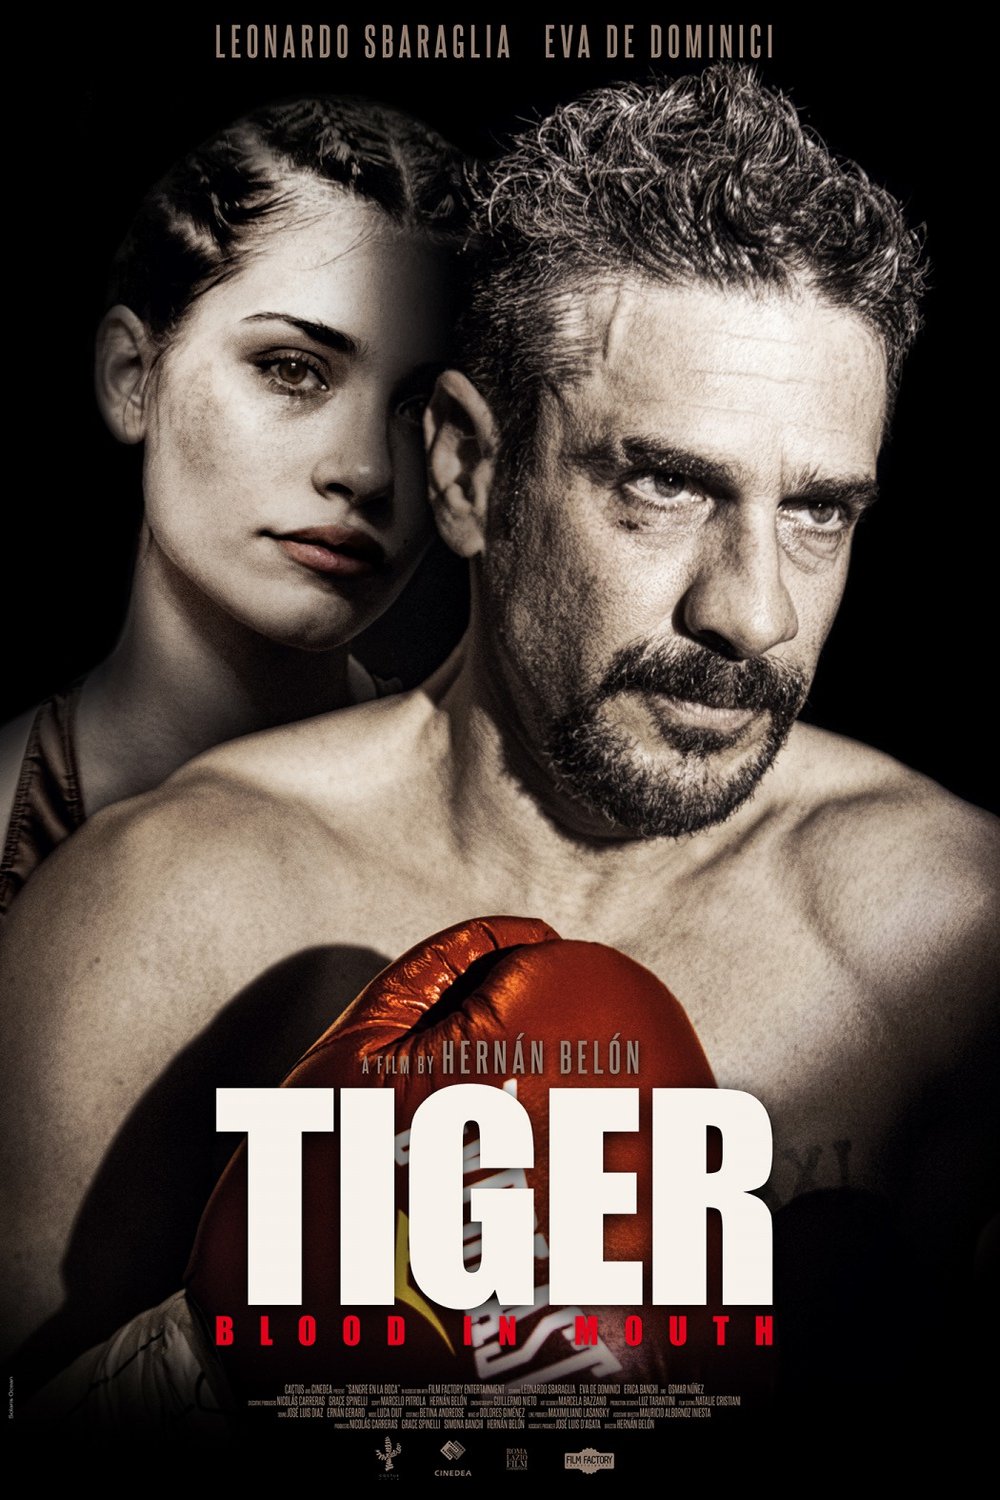 Spanish poster of the movie Tiger: Blood in Mouth